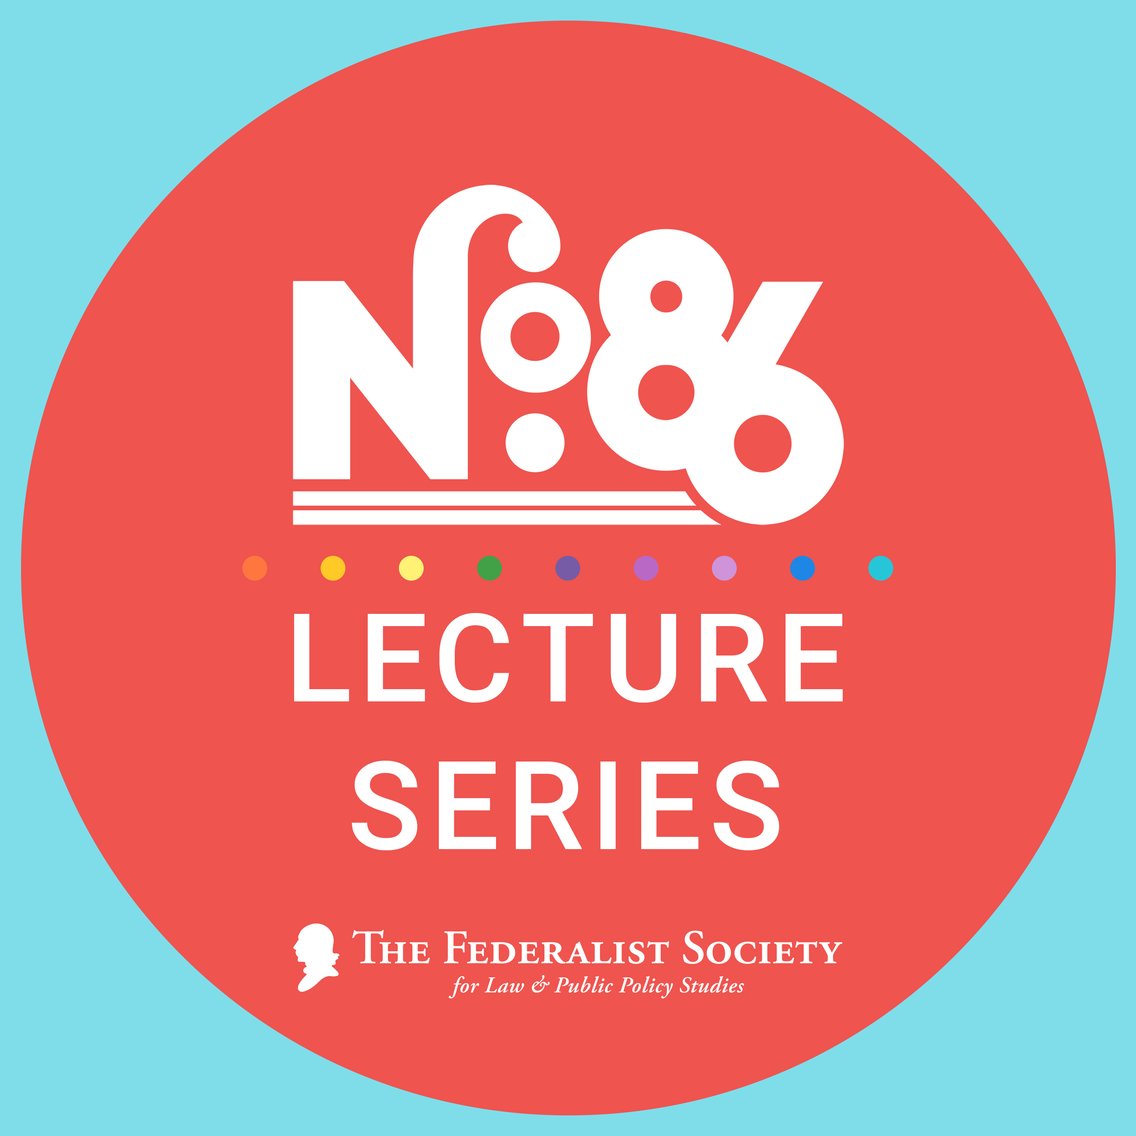 No. 86 Lecture Series - Cover Image